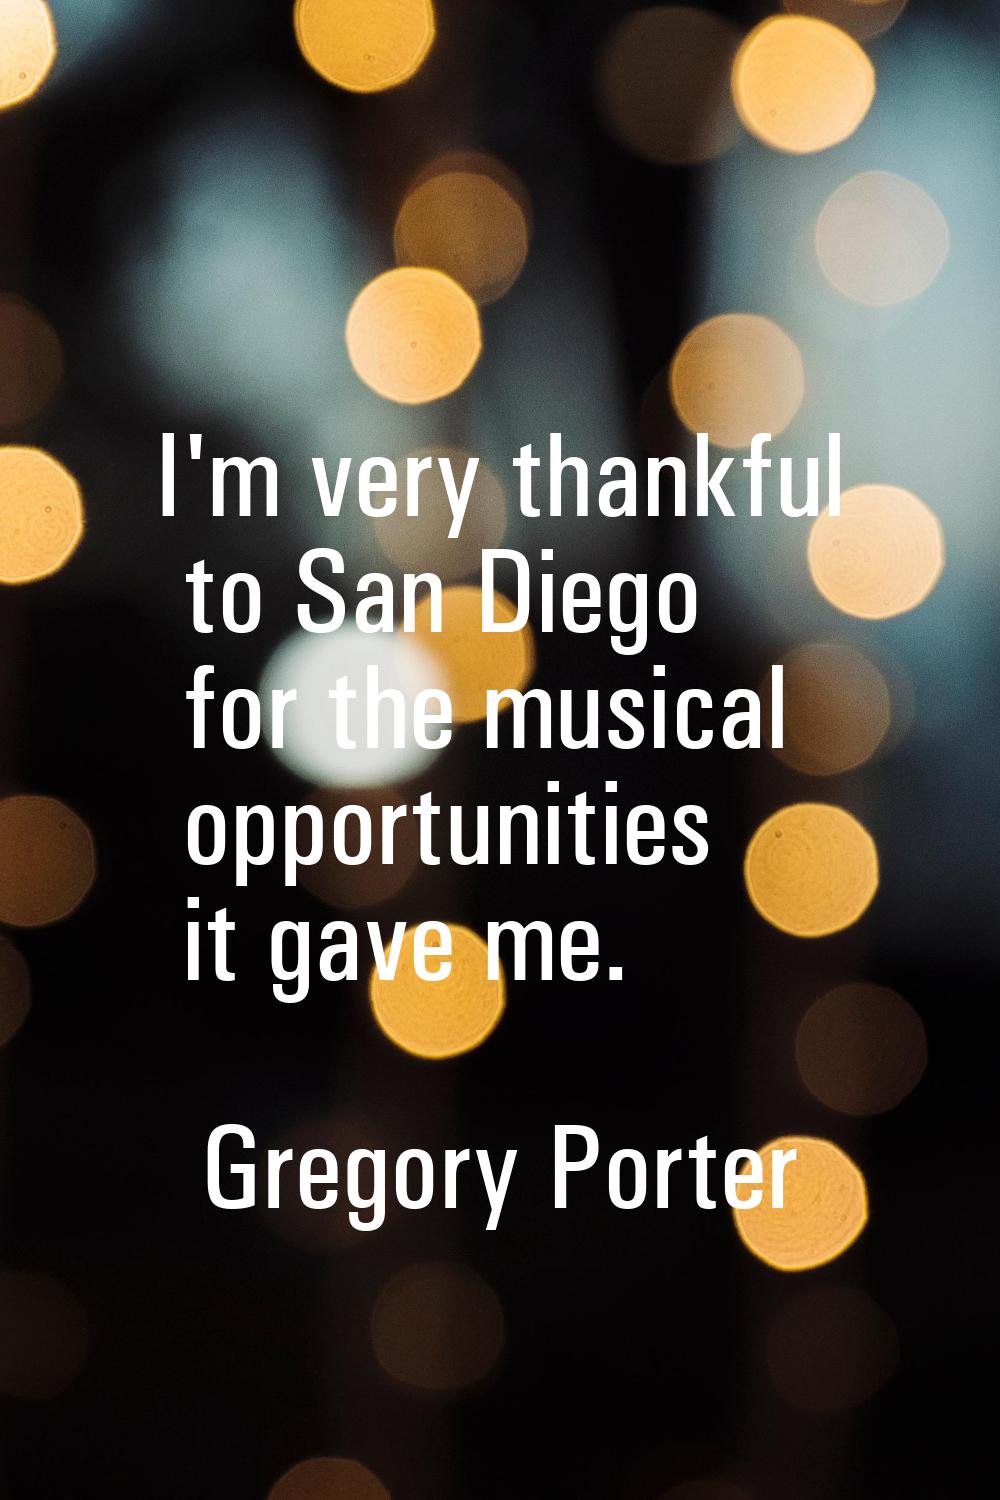 I'm very thankful to San Diego for the musical opportunities it gave me.